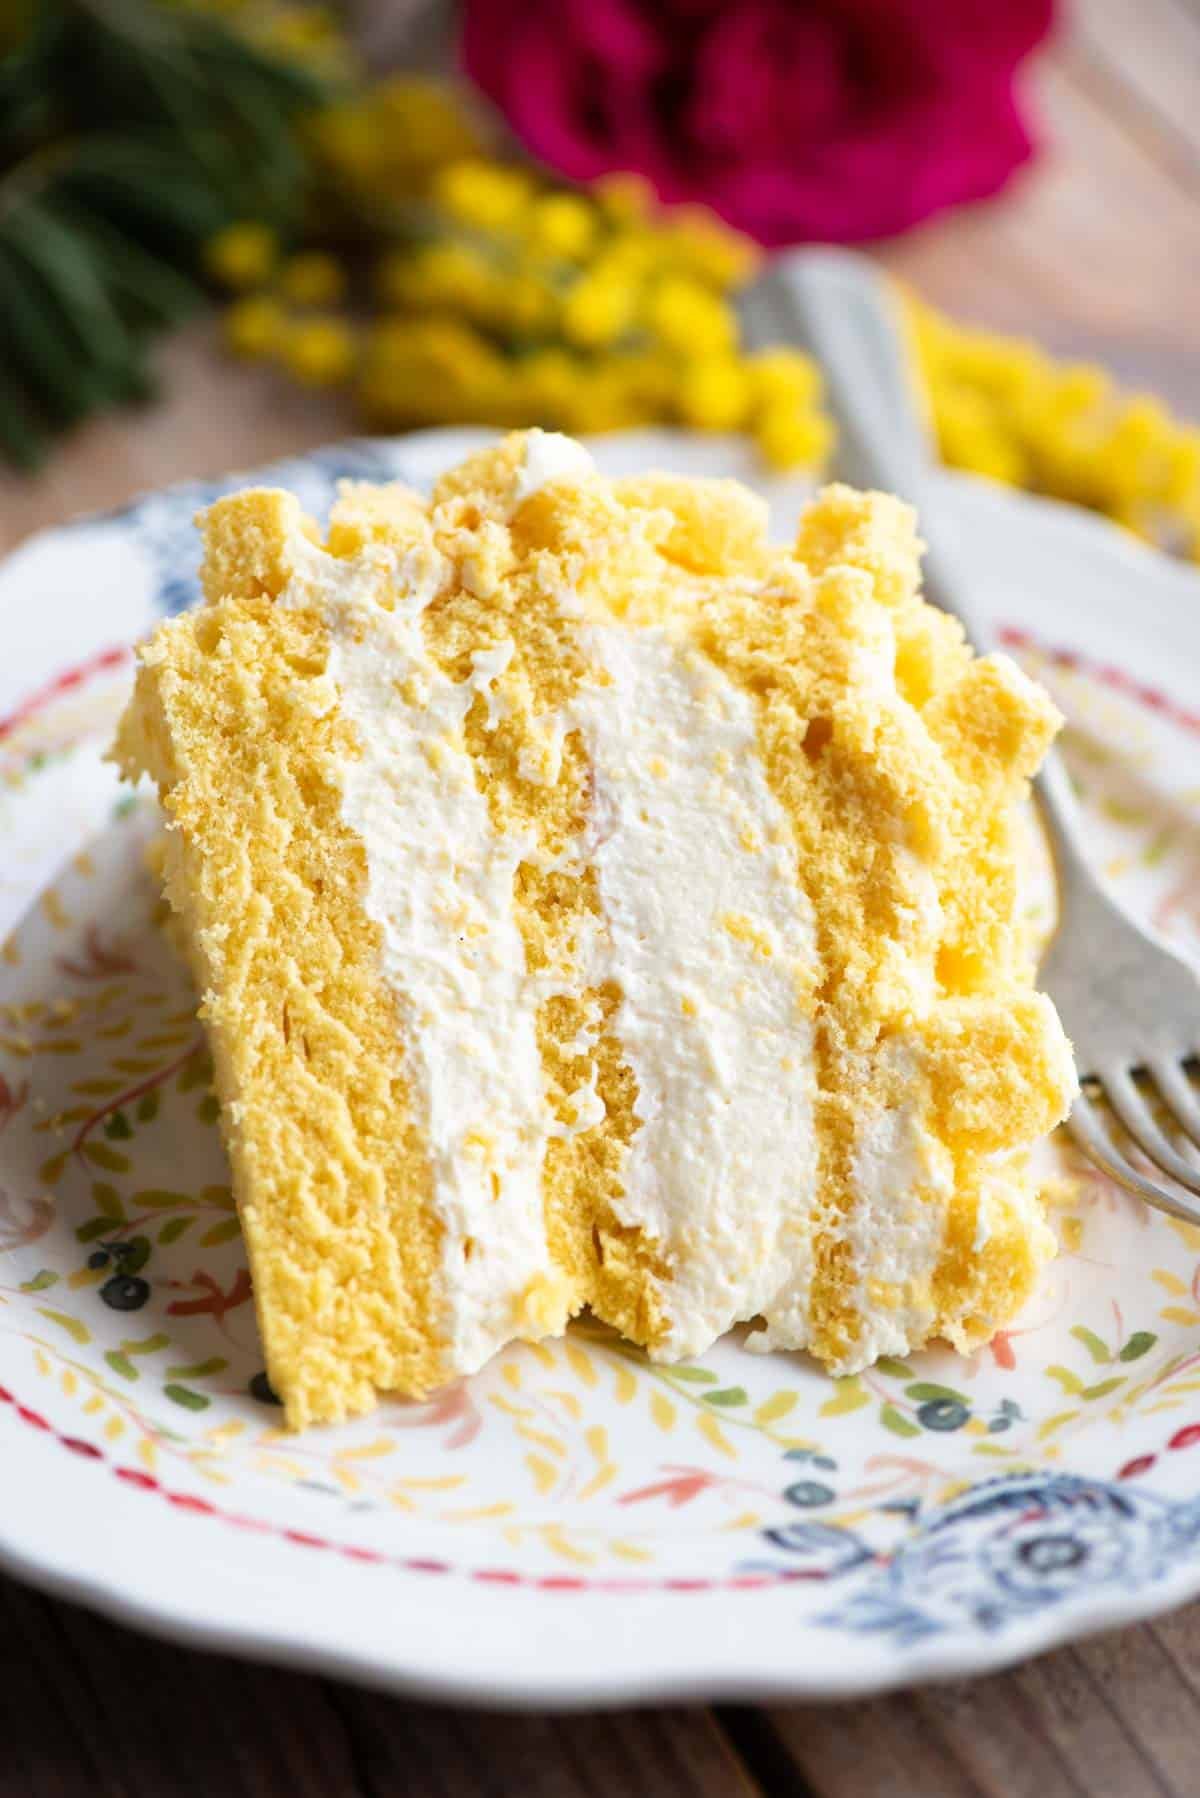 A slice of mimosa cake with three layers and filled with cream on a small plate.